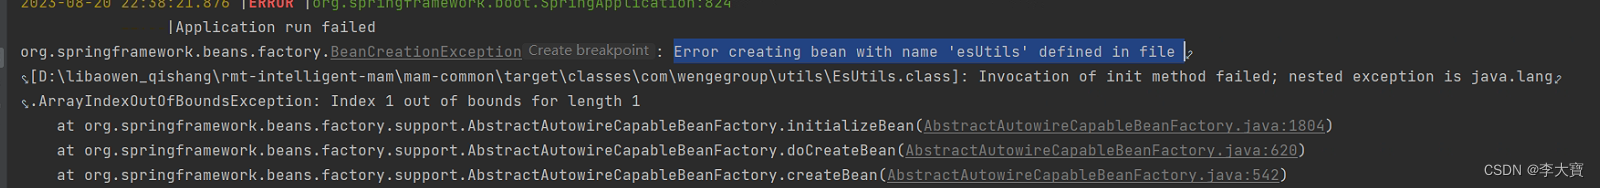 Error creating bean with name ‘esUtils‘ defined in file